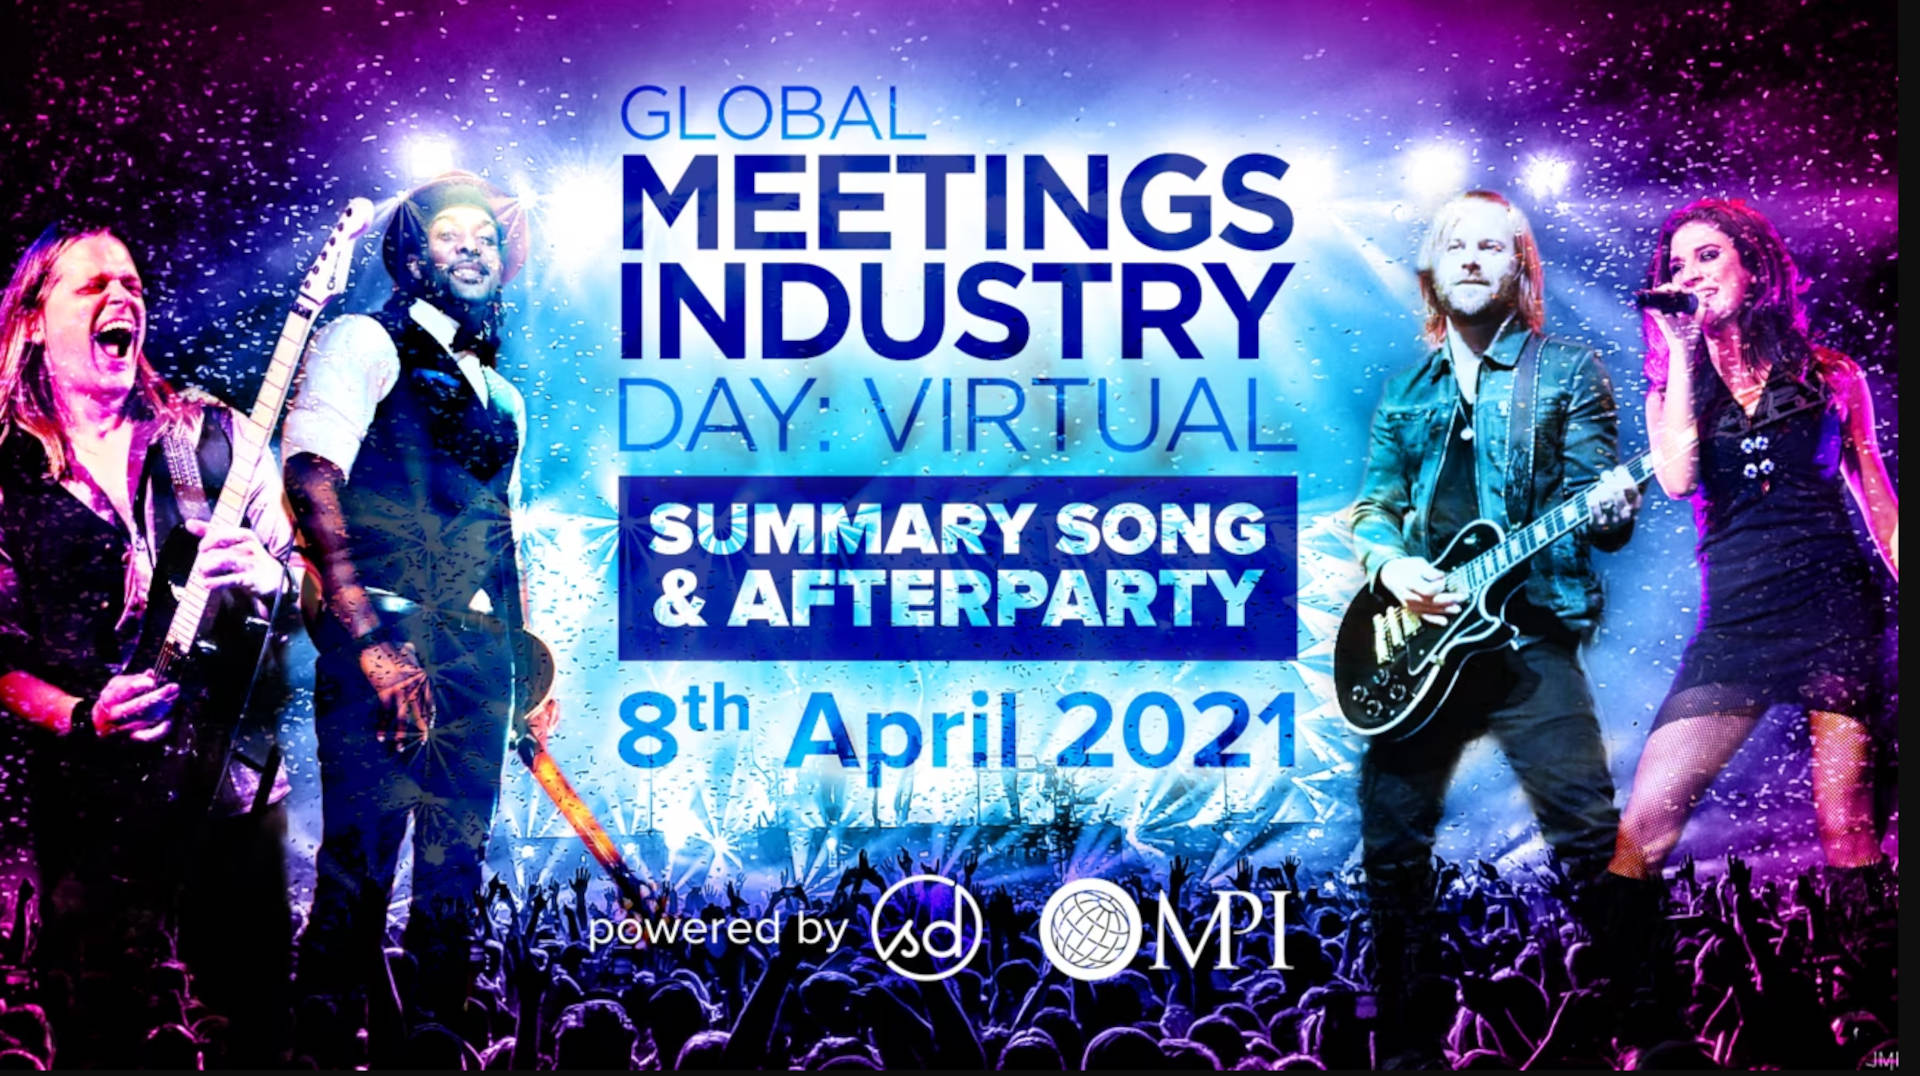 GMID Virtual Summary Song & Afterparty with SongDivision & MPI